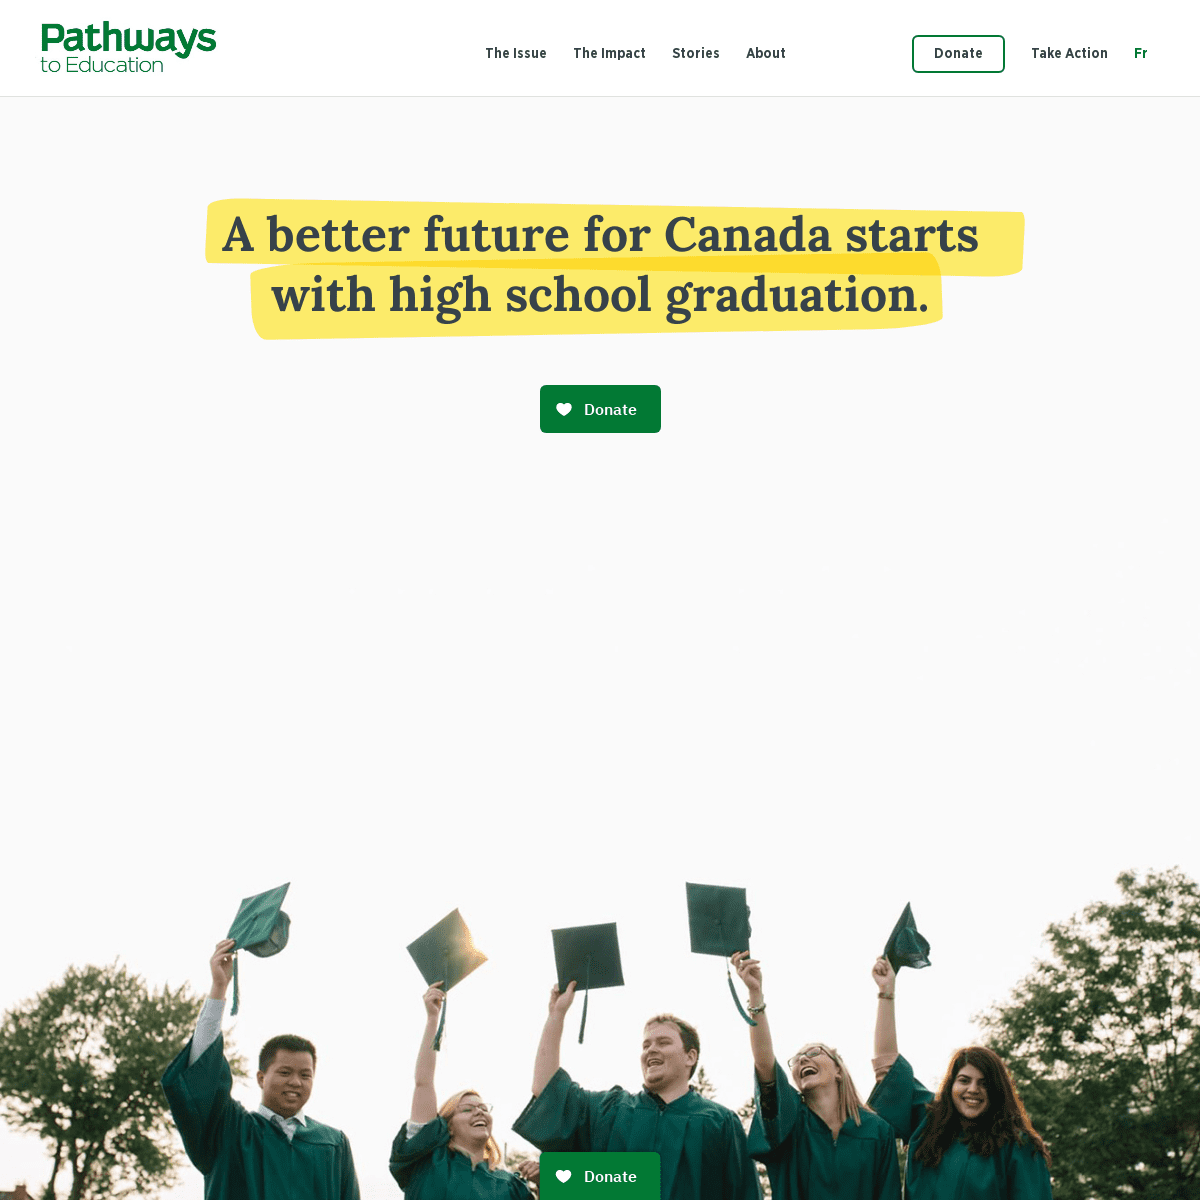 A complete backup of https://pathwaystoeducation.ca